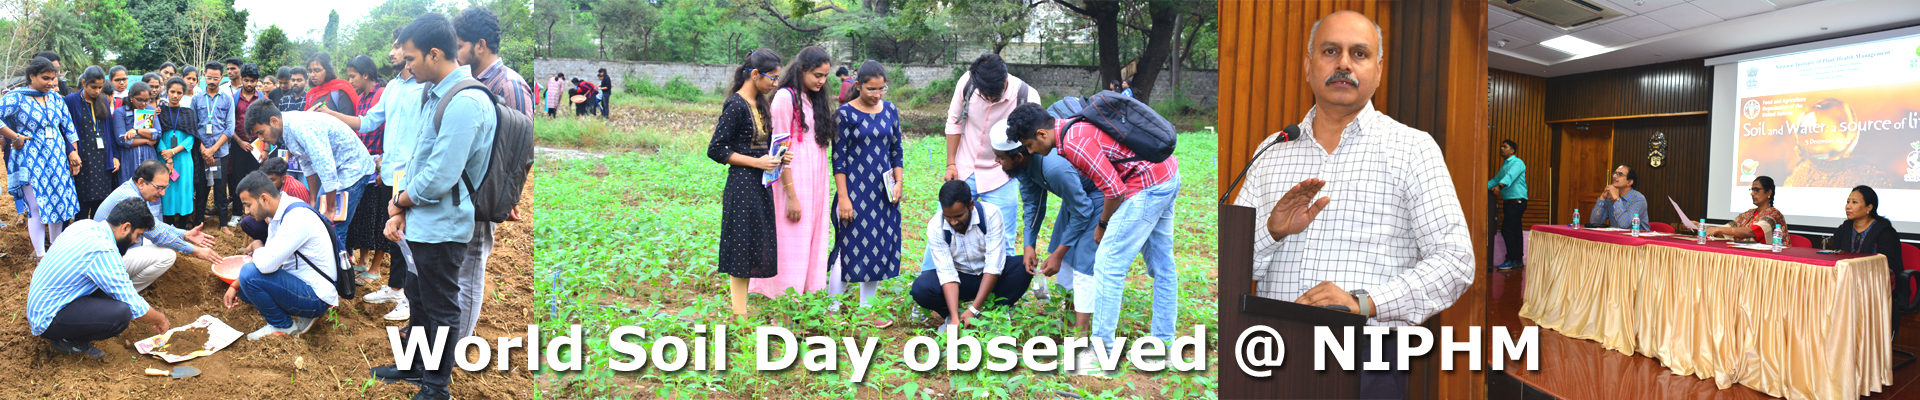 World Soil Day observed @ NIPHM